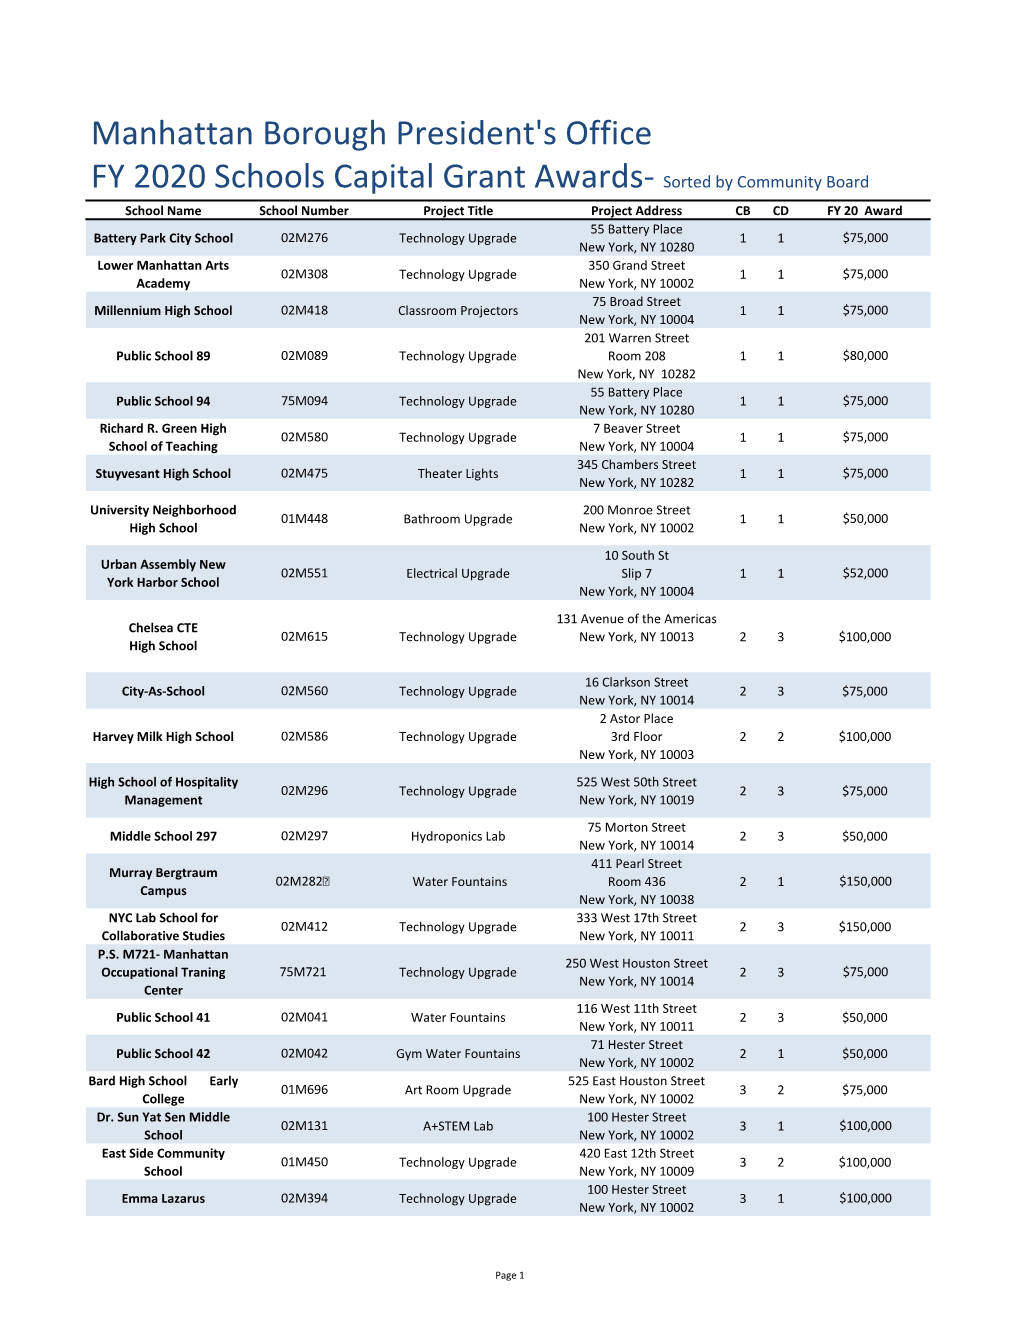 Manhattan Borough President's Office FY 2020 Schools Capital Grant Awards- Sorted by Community Board